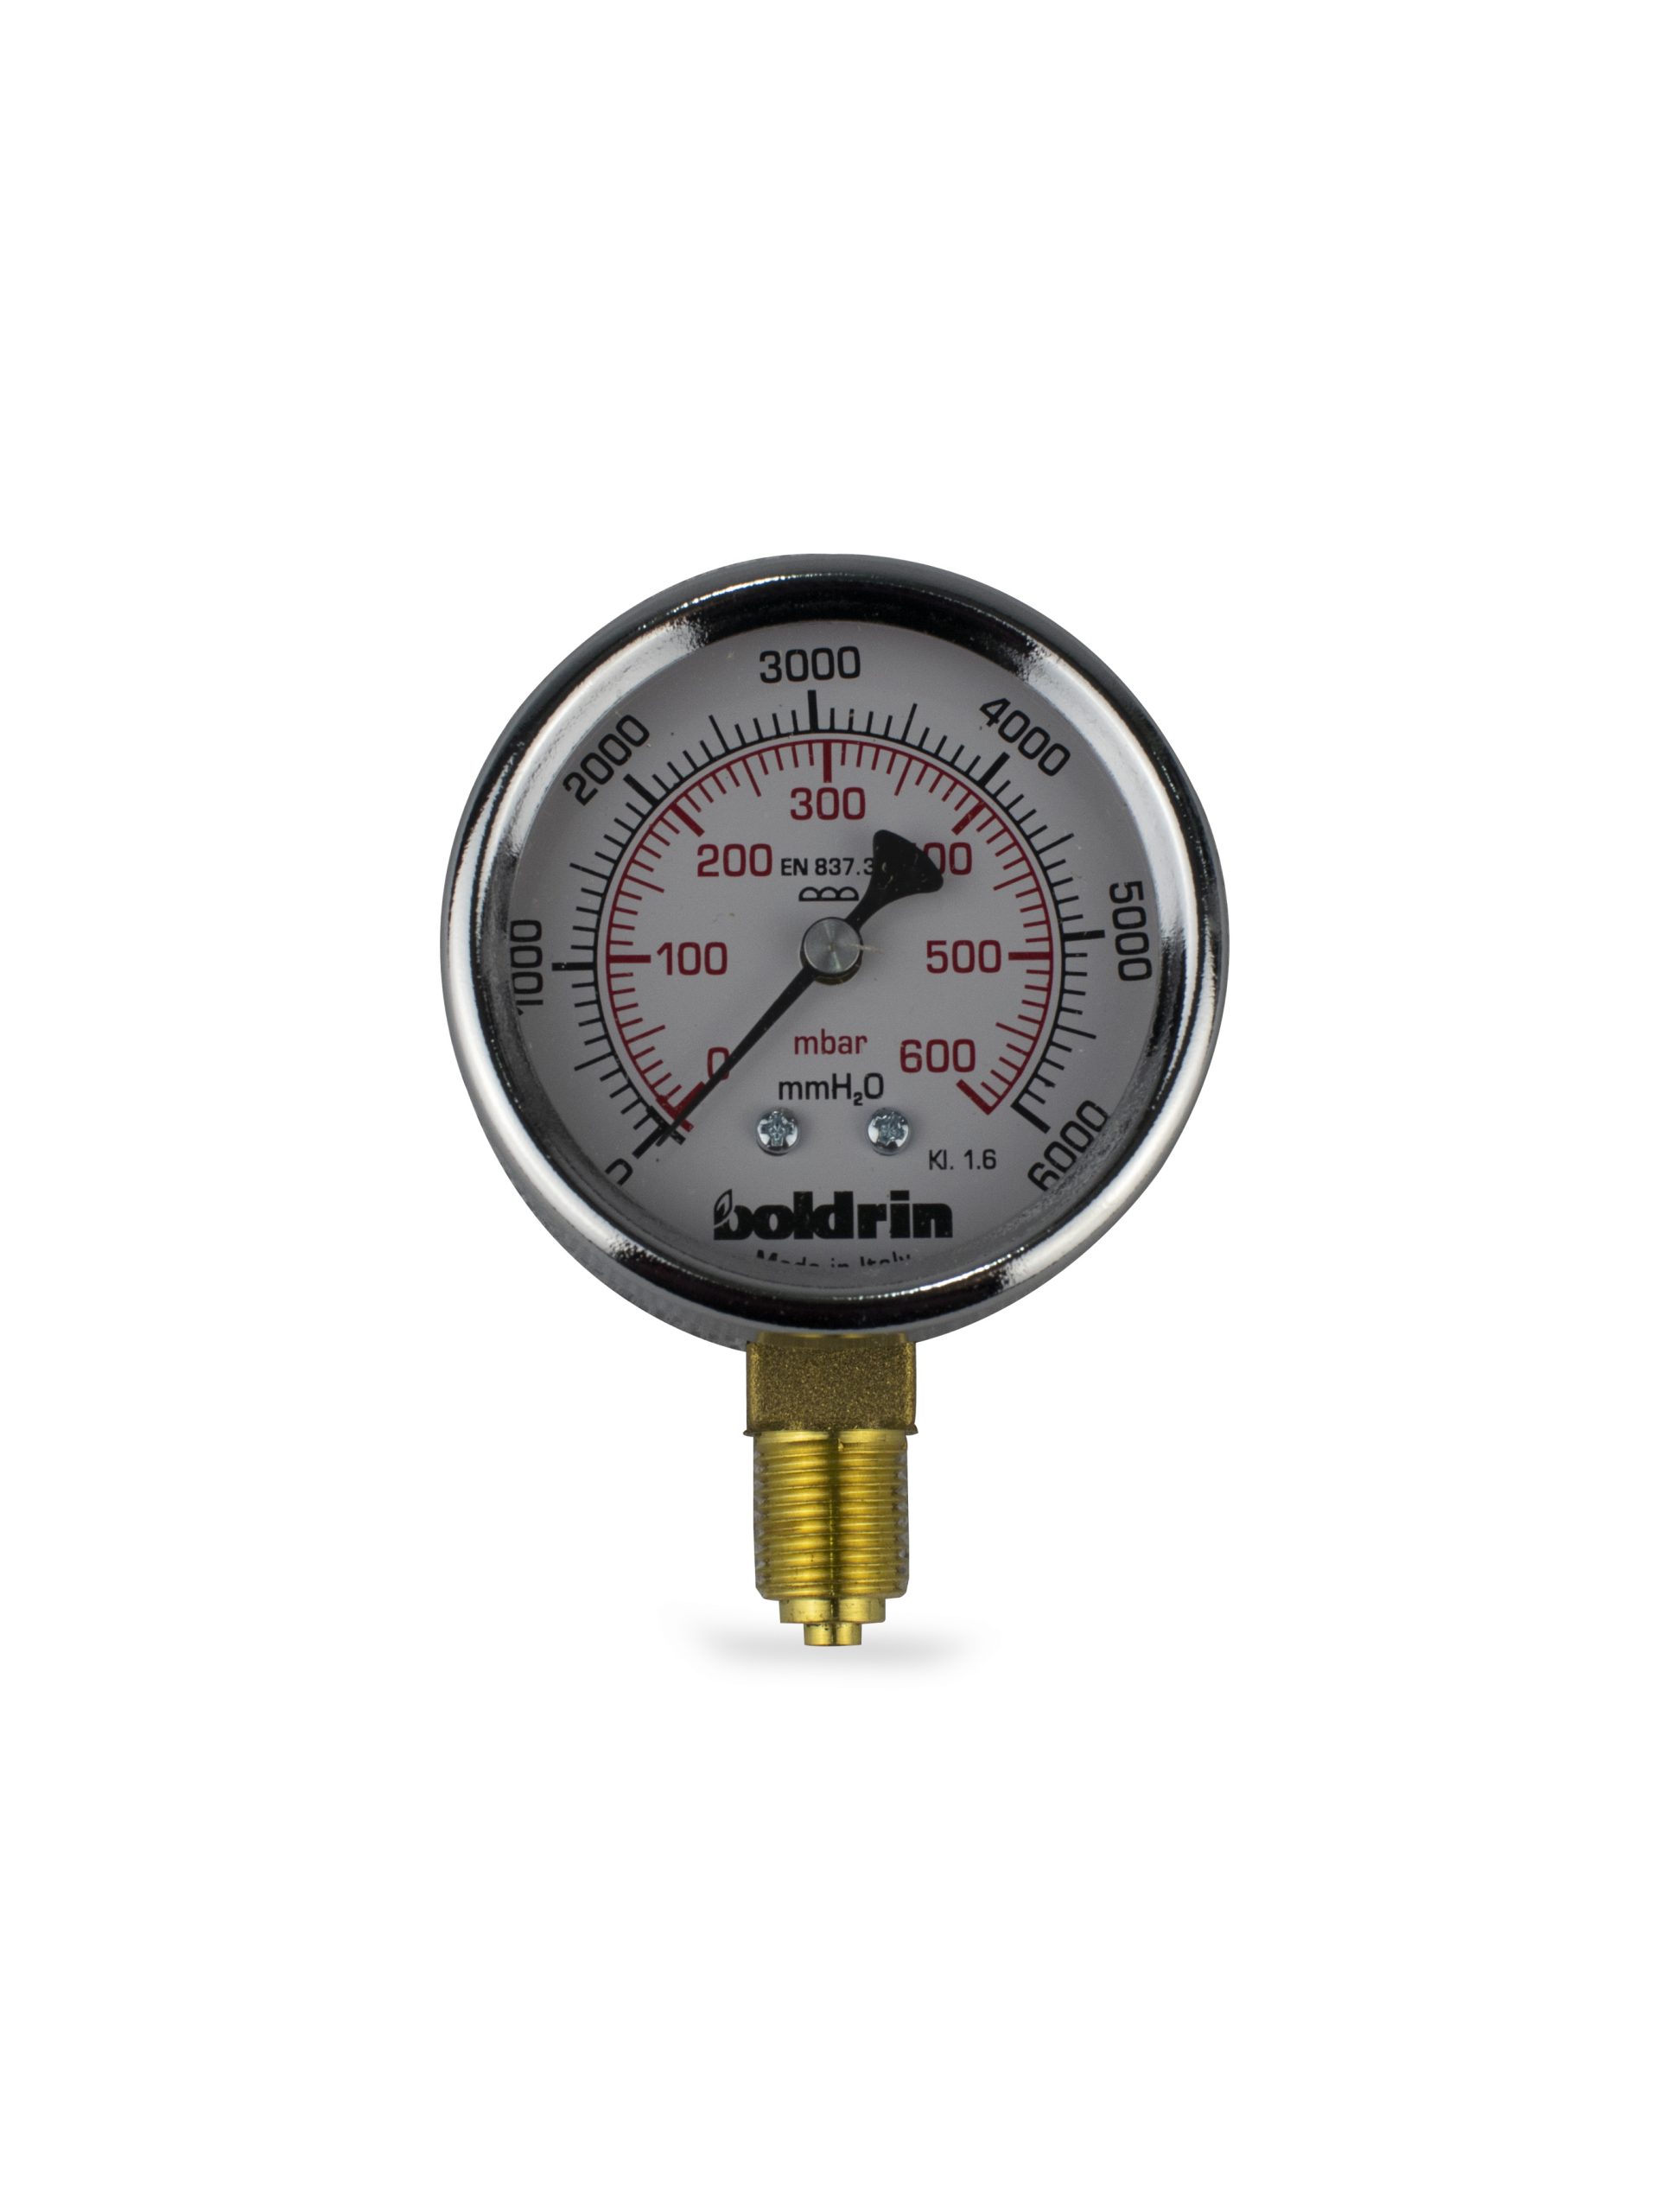 PRESSURE GAUGE 0-600 MBAR, DIAMETER 2 1/2 Inches CONNECTION 1/4 Inches from Gas Equipment Company Llc Abu Dhabi, UNITED ARAB EMIRATES